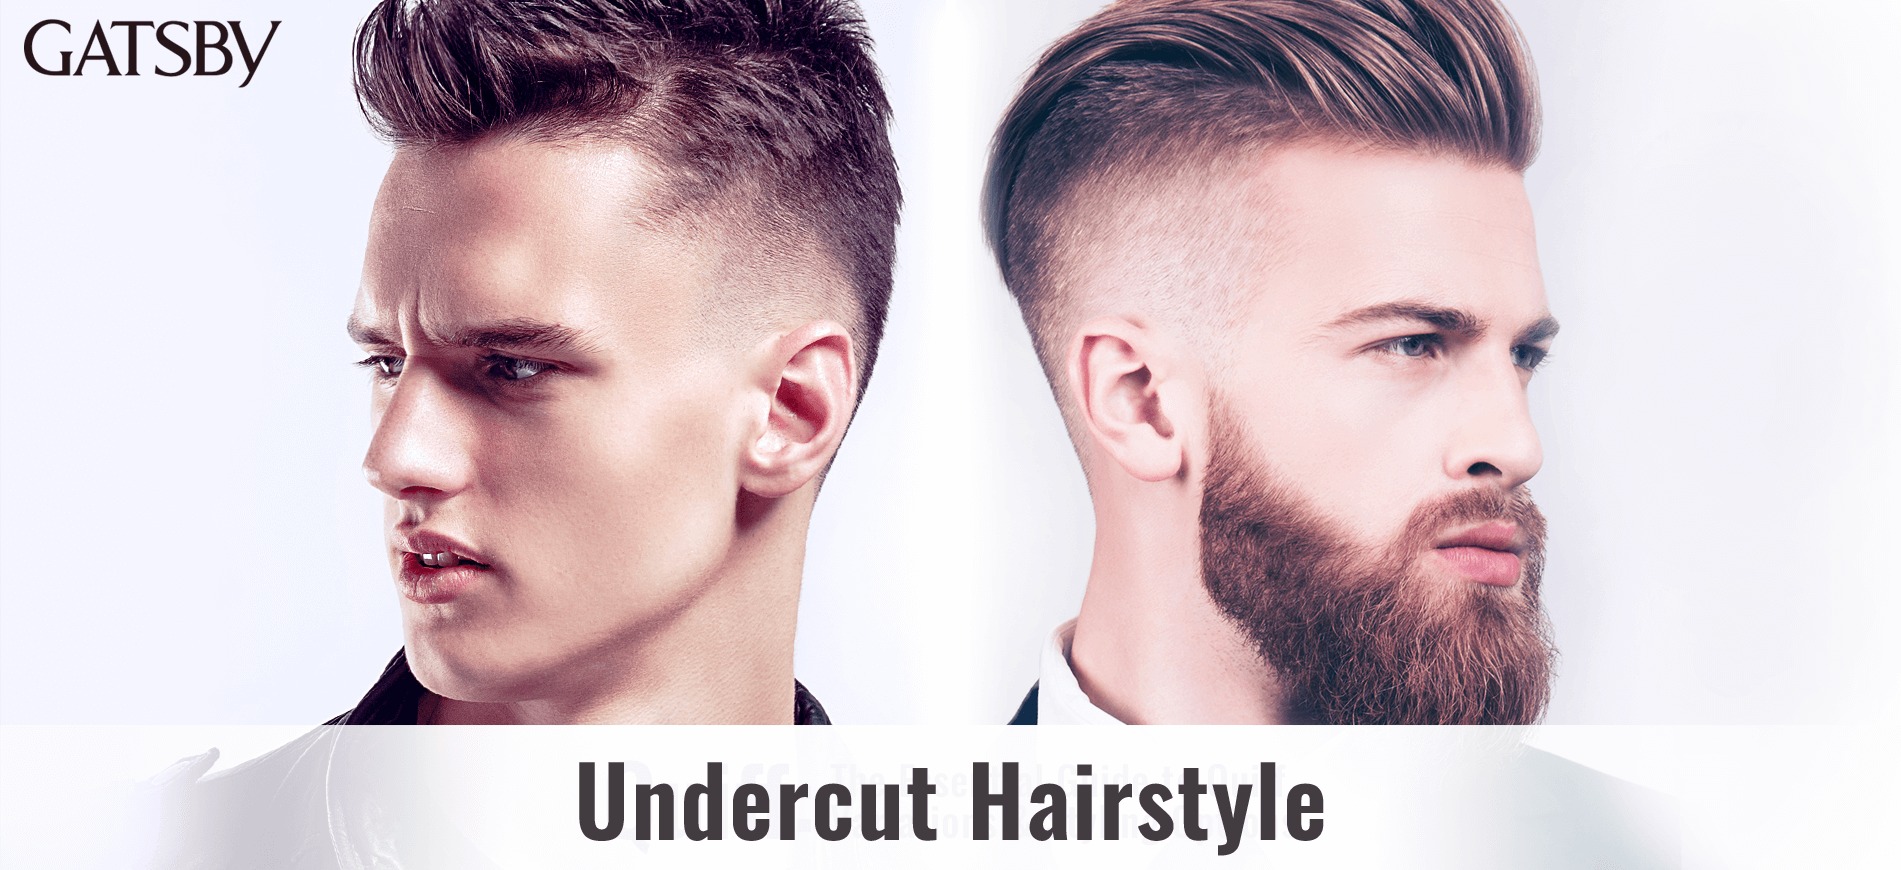 6 Best Fade Hairstyles for Men, According to a Barber | Man of Many